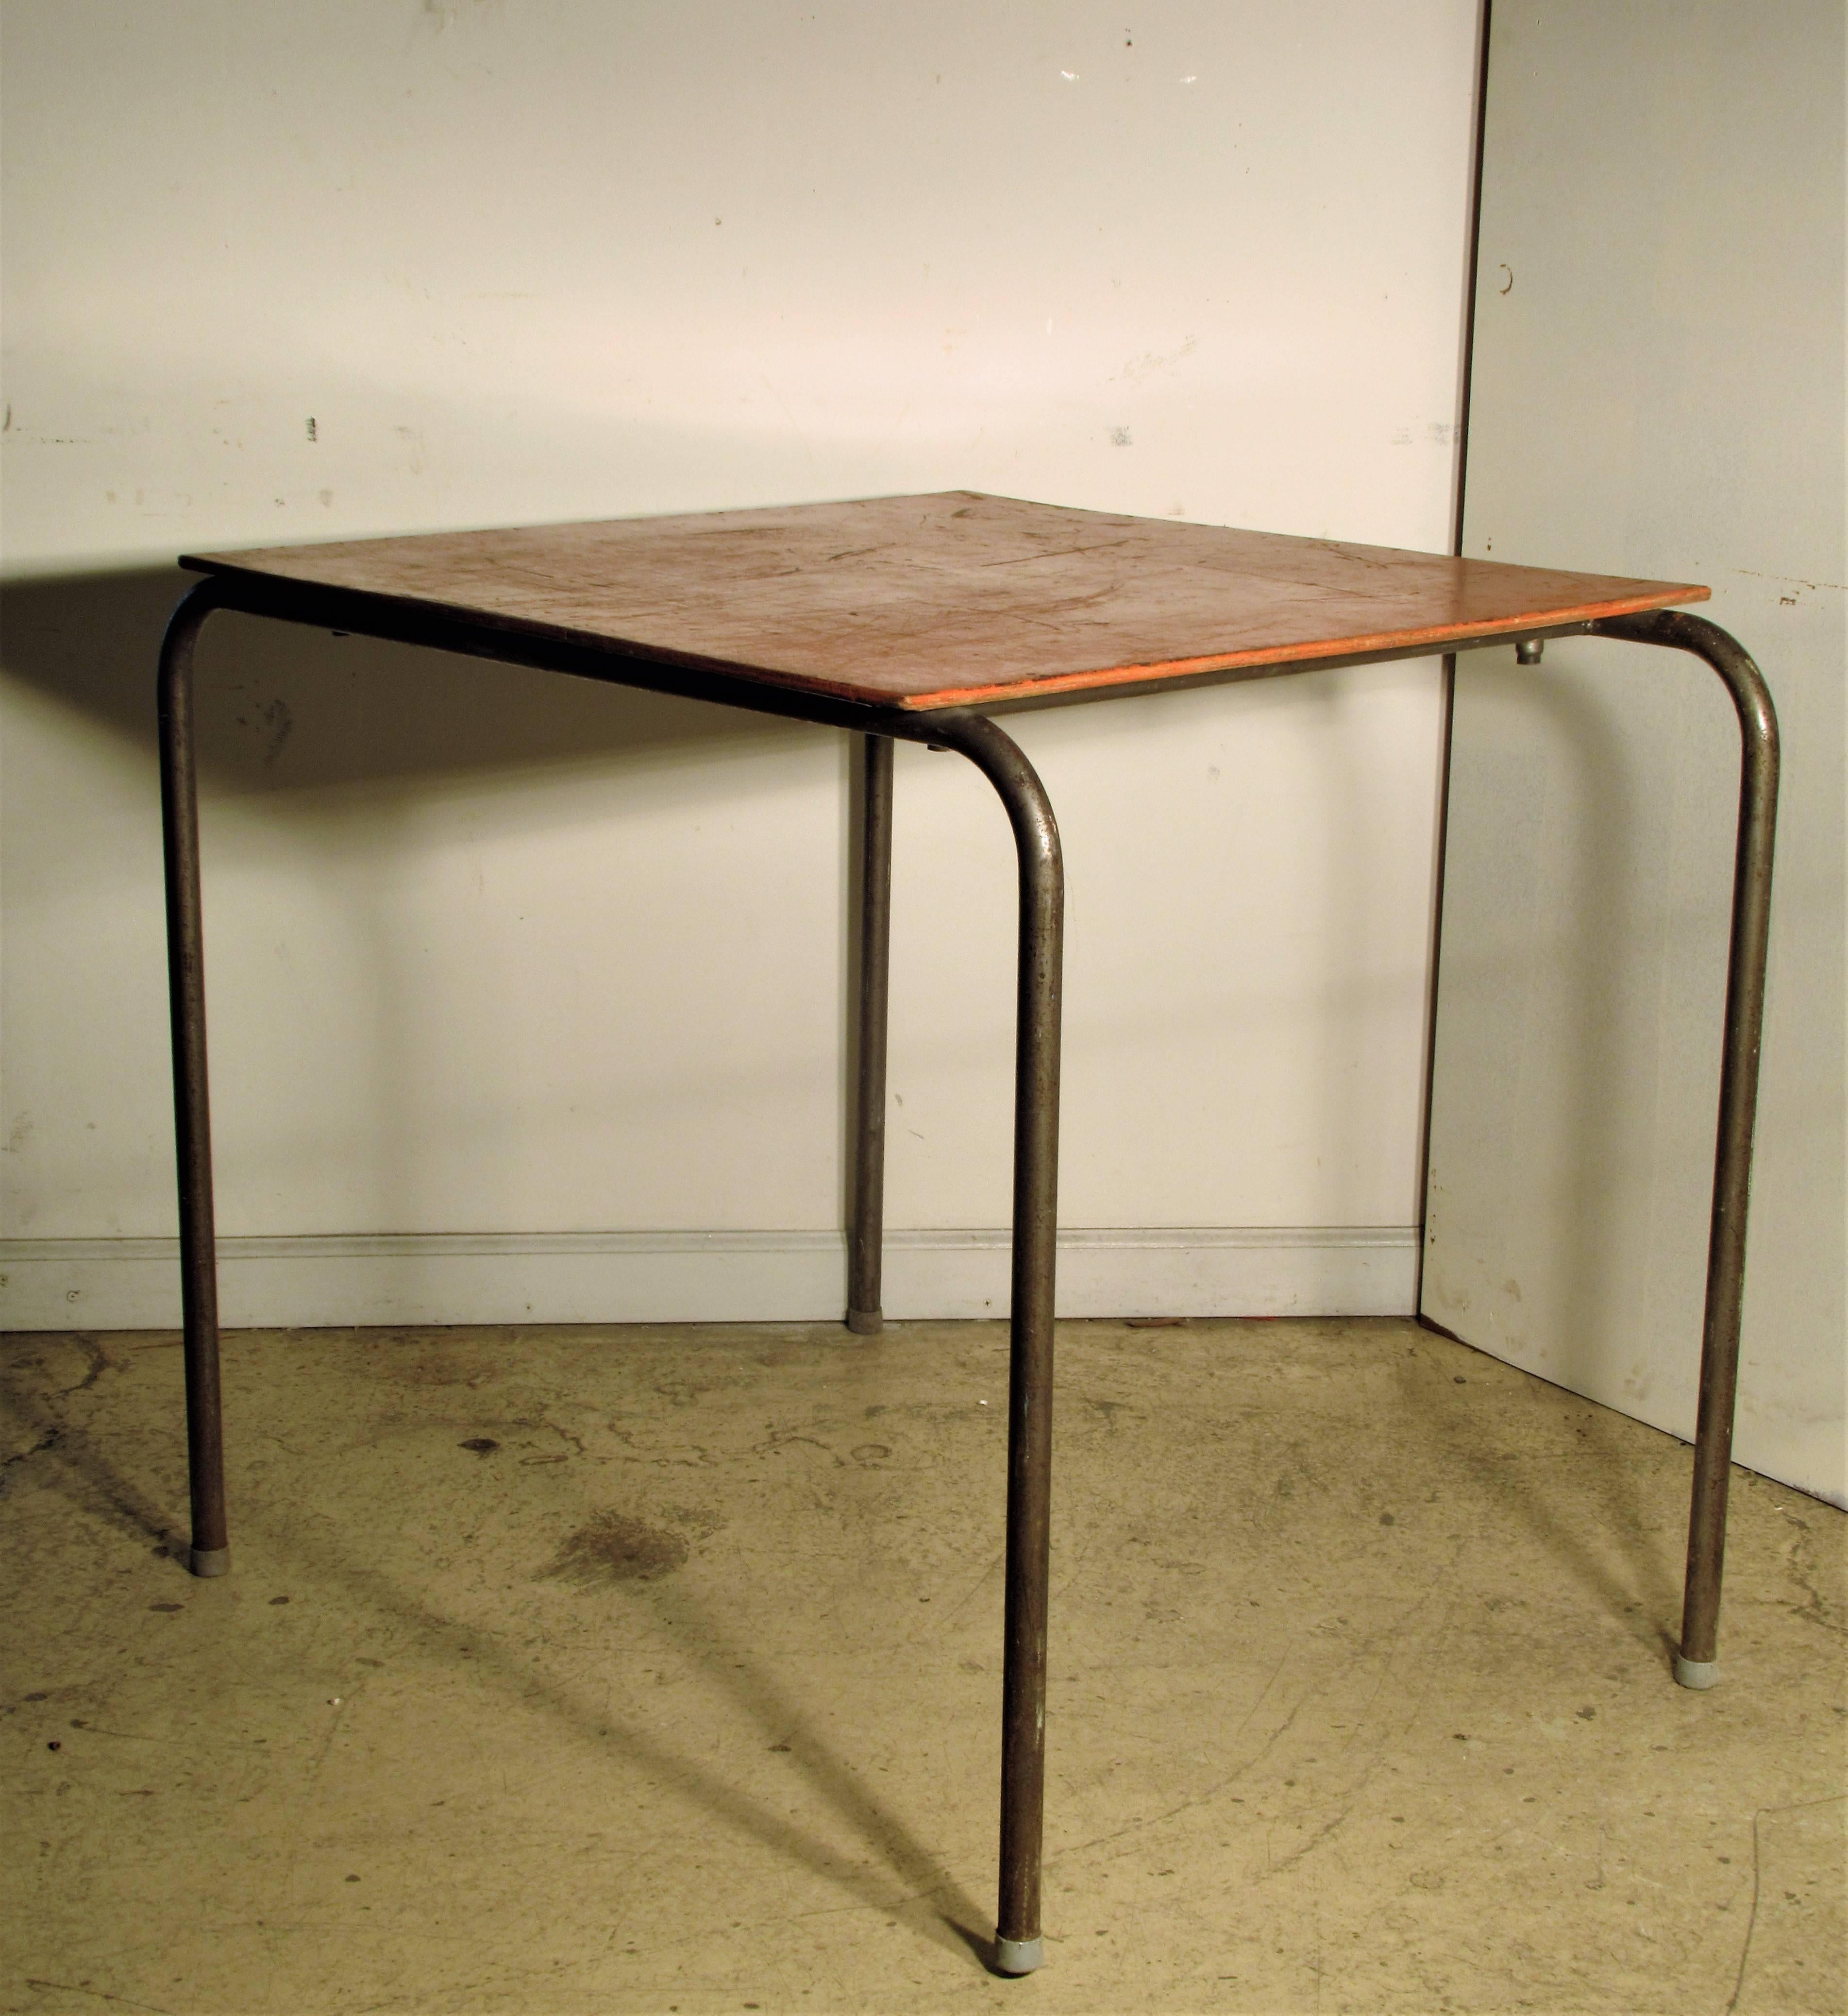 Silver gray finish tubular steel table with original orange painted wood top. Beautiful minimalist asymmetrical sculptural form in the Dutch Modernist or Bauhaus style of Marcel Breuer/circa 1930-1950.